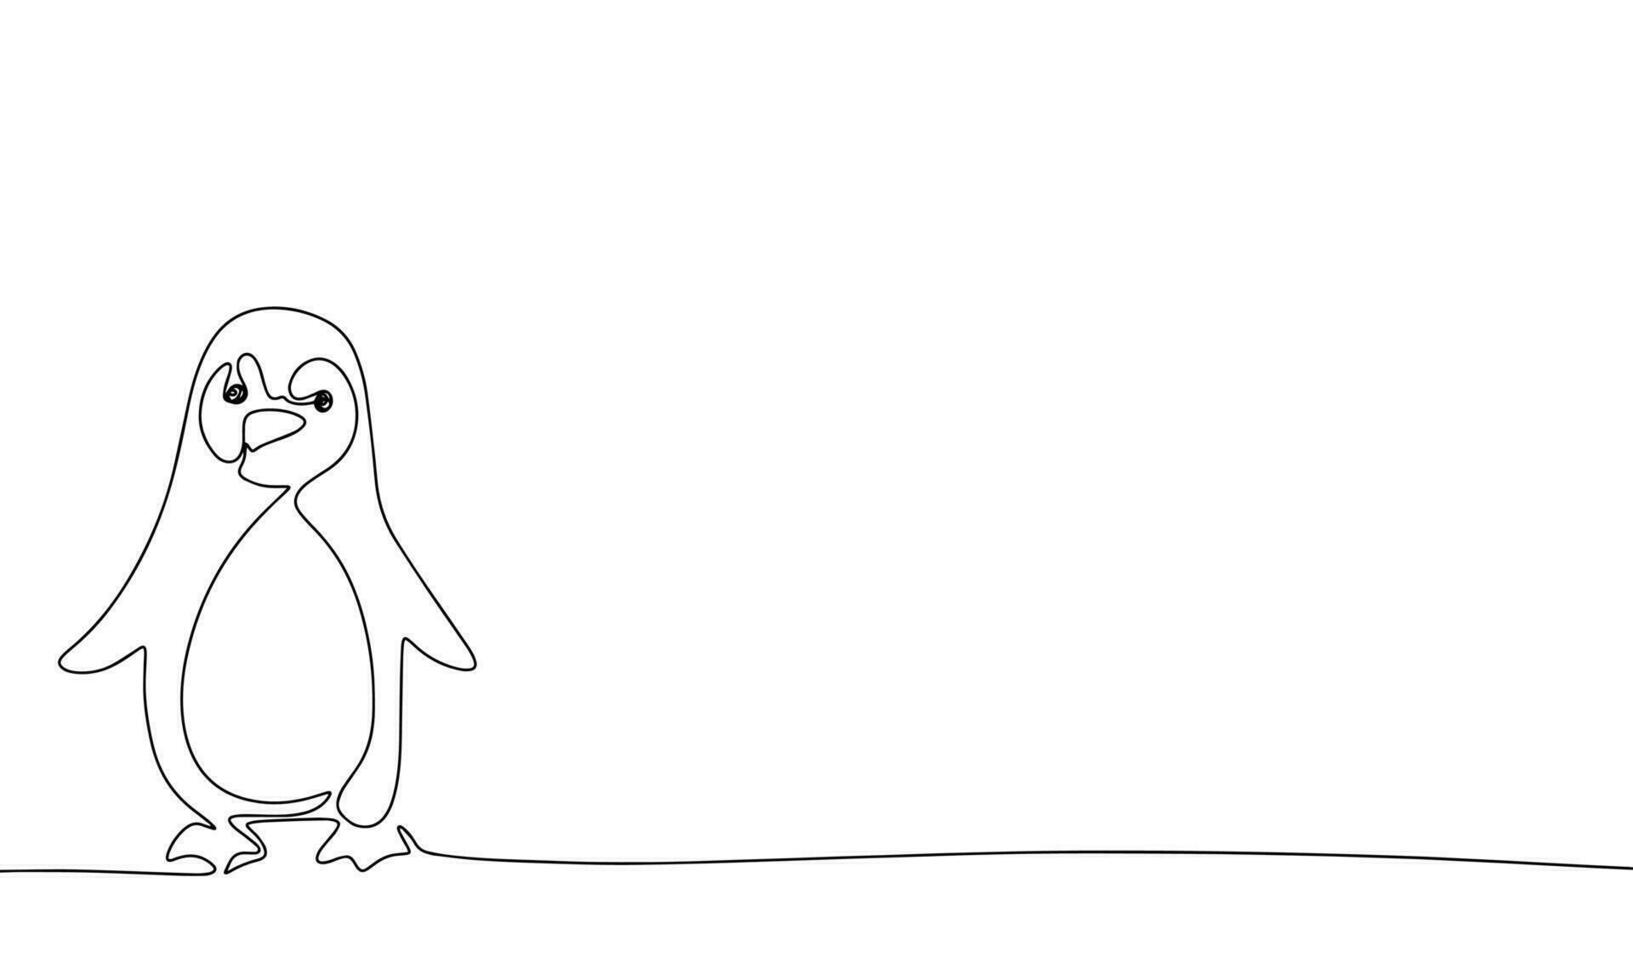 Silhouette of penguin. One line continuous concept banner with bird animal. Outline, line art, vector illustration.